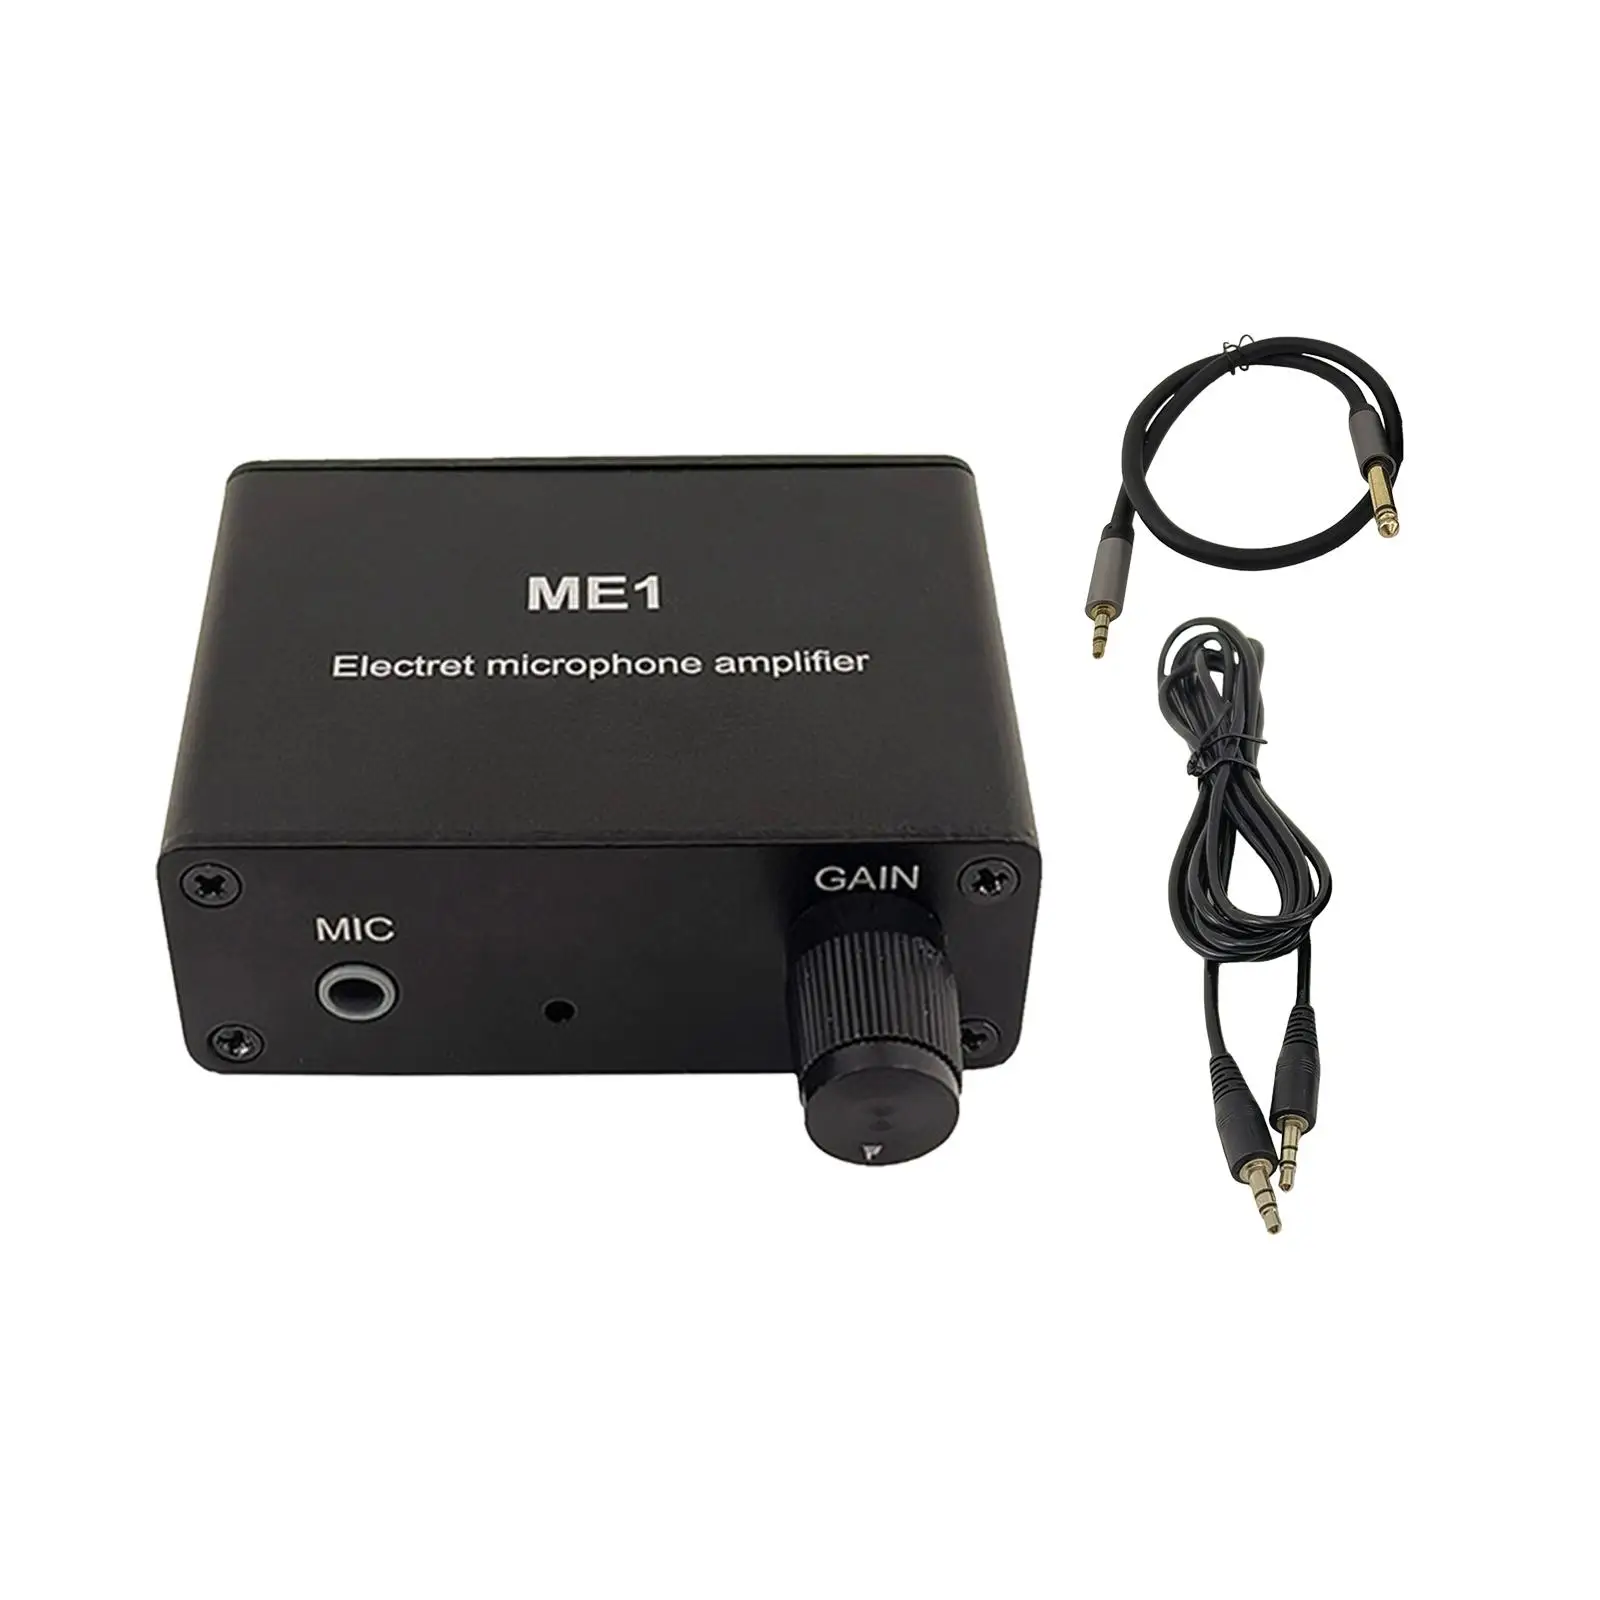 Microphone Amplifier Sturdy Lightweight Small Microphone Preamp for Computers Car Stage Performance Studio Recording Smartphones